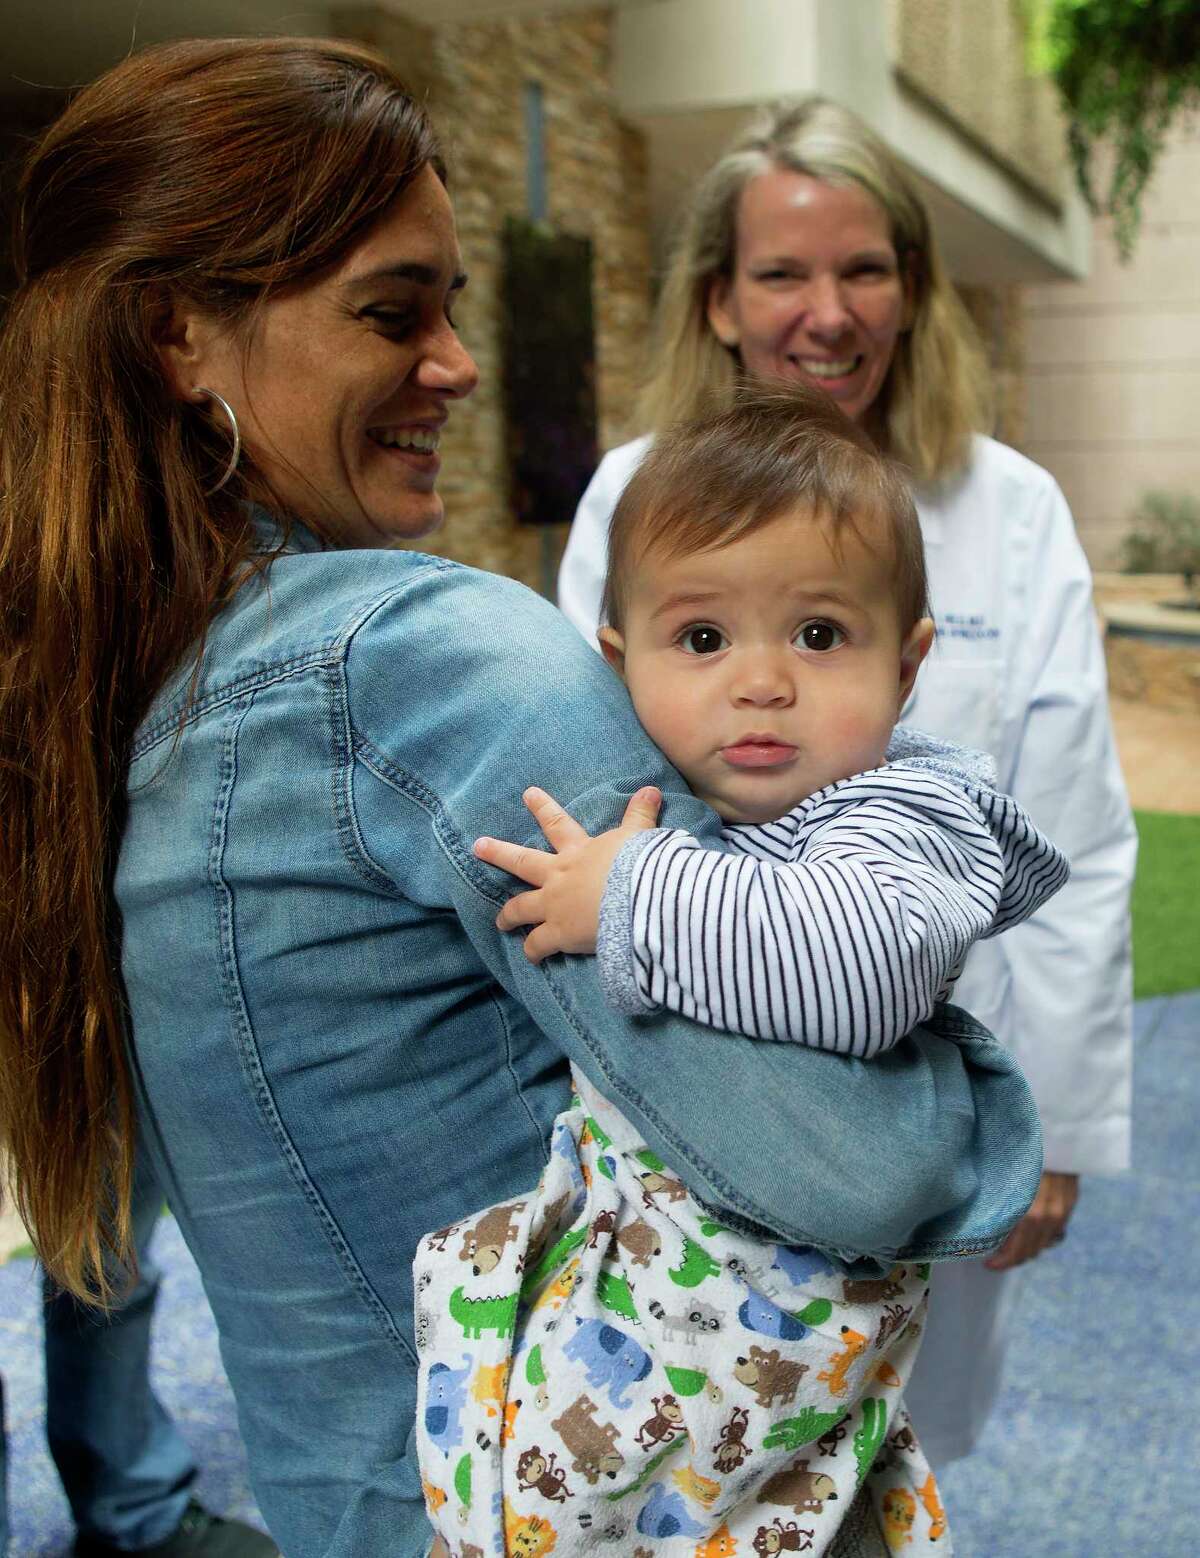 Ana Carla Cepeda and her six-month-old son, Bruno, meet with Dr. Barbara Held at Houston Methodist Hospital Texas Medical Center, Wednesday, March 8, 2017. Cepeda was diagnosed with early-stage cervical cancer in late 2014, but she wasn't ready to give up on having another child. After a relatively rare procedure by Dr. Anuj Suri, Cepeda gave birth to Bruno under Dr. Held's care in late 2016. ( Mark Mulligan / Houston Chronicle )